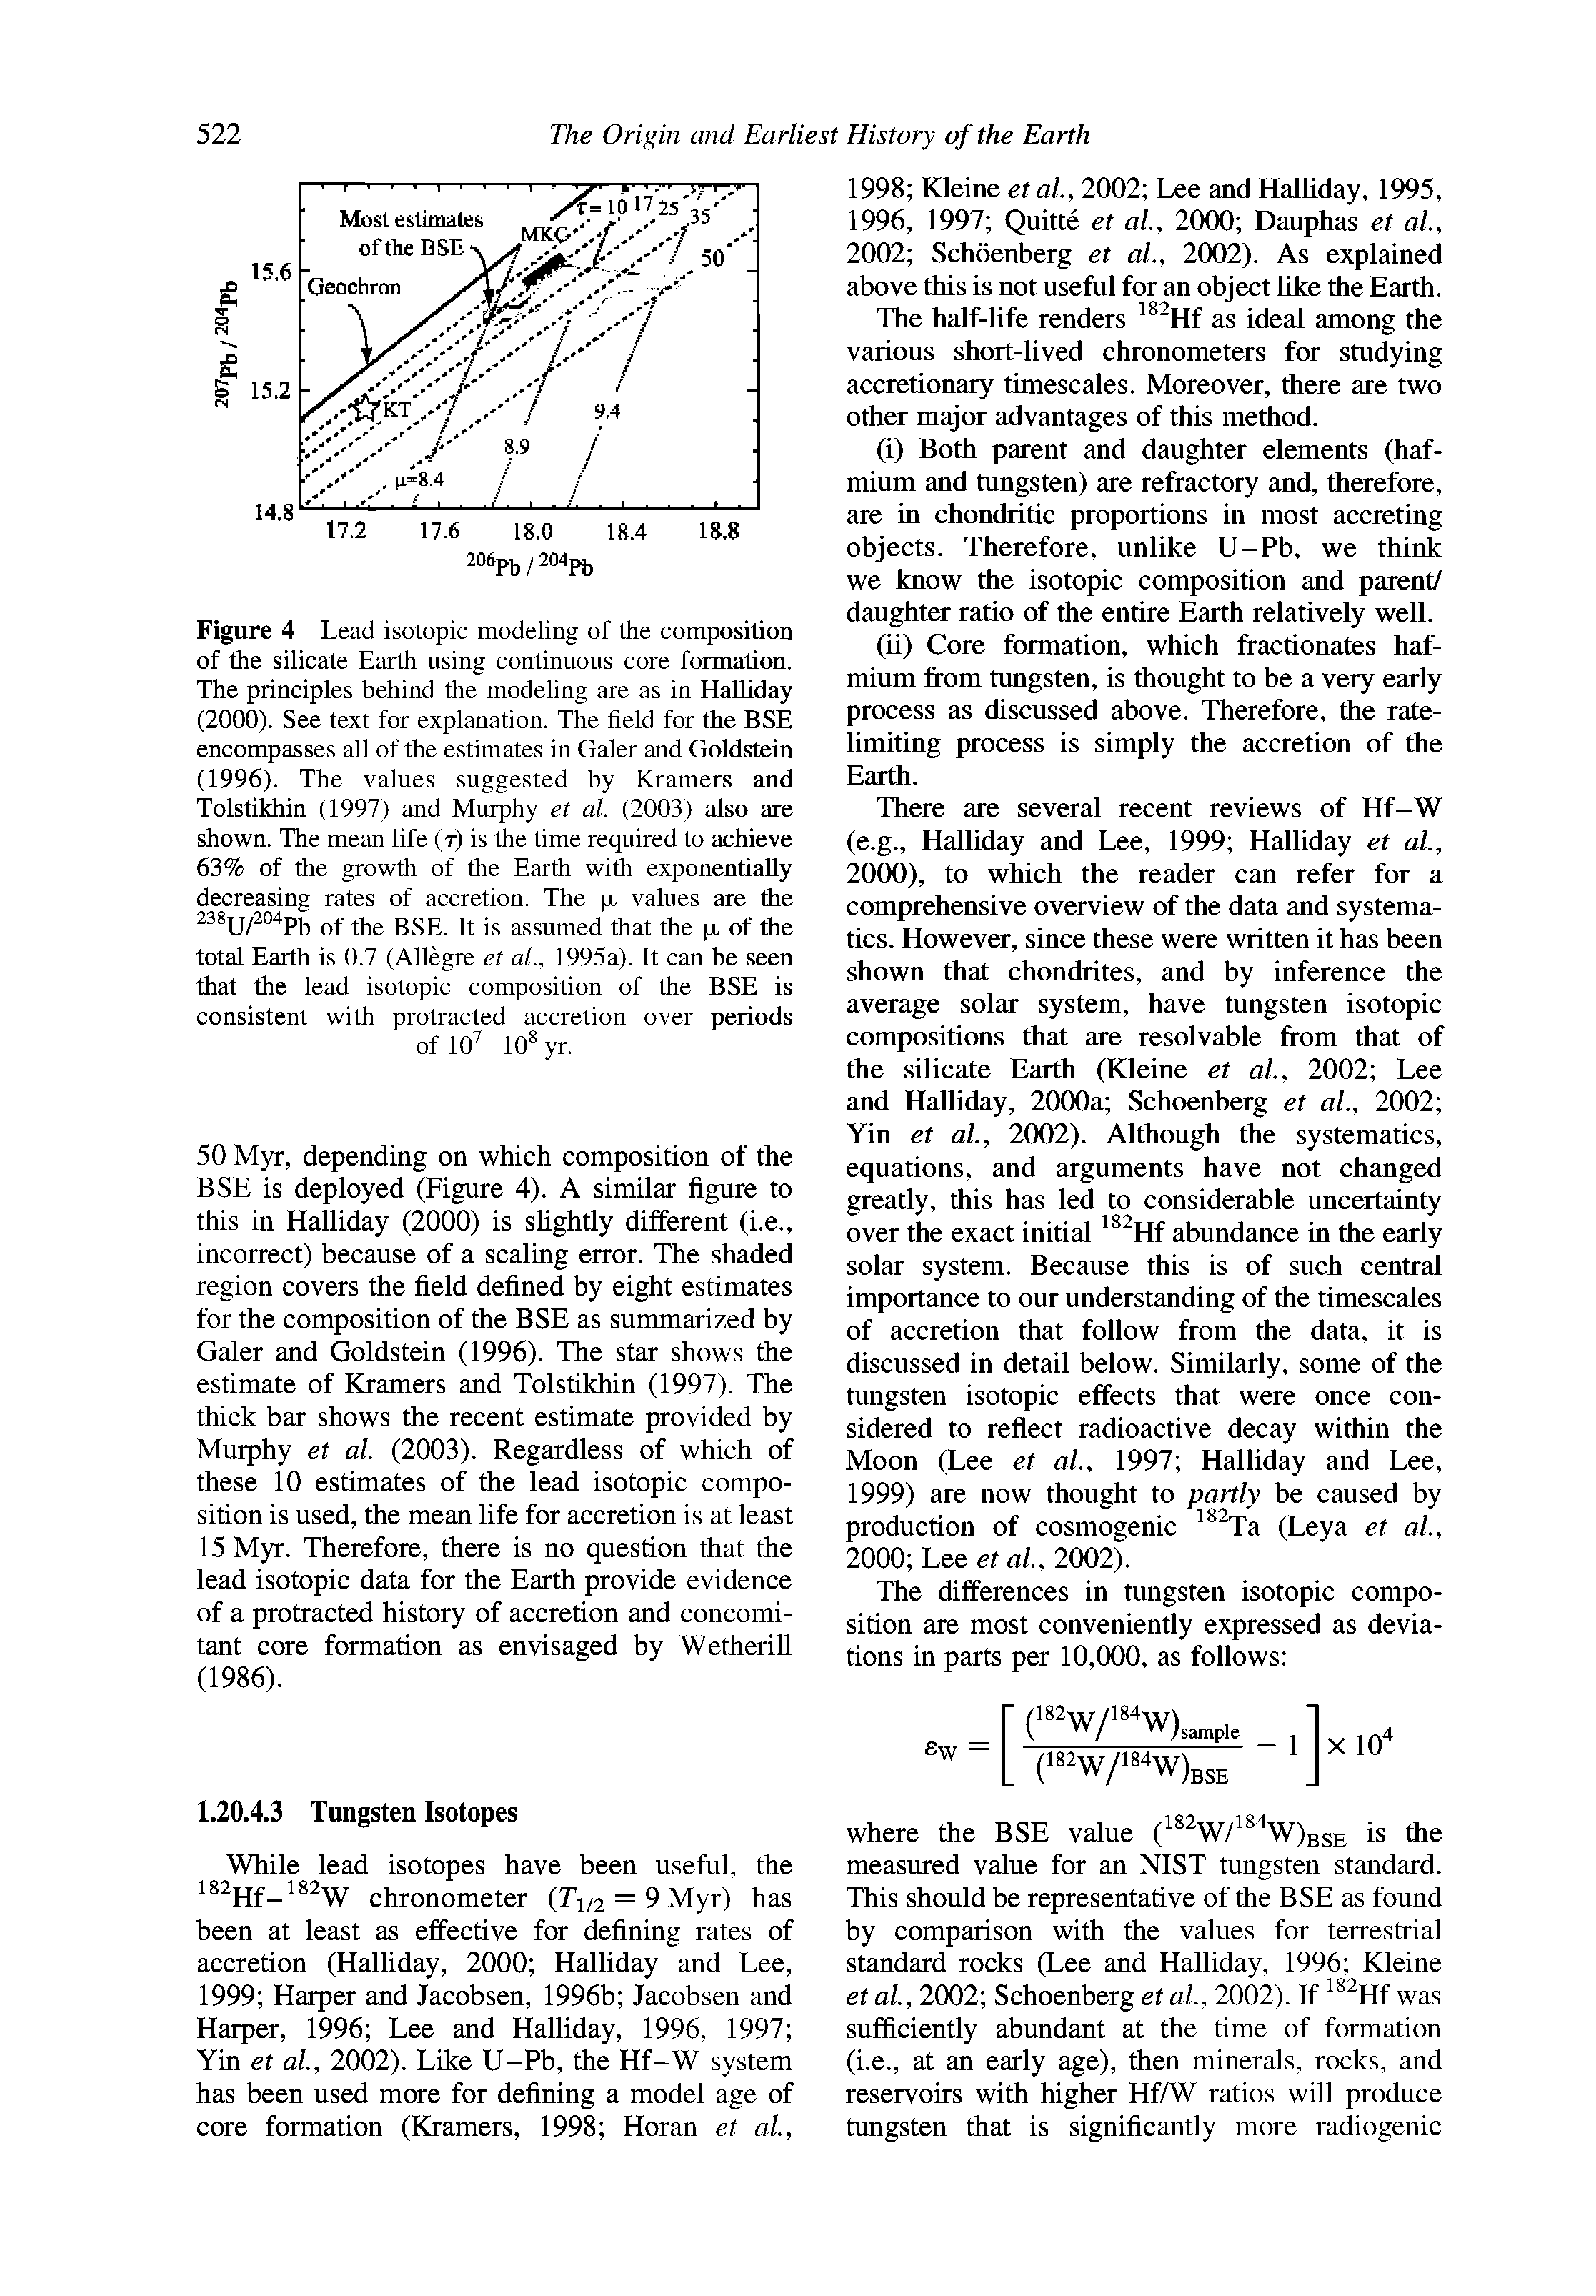 Figure 4 Lead isotopic modeling of the composition of the silicate Earth using continuous core formation. The principles behind the modeling are as in Halliday (2000). See text for explanation. The Held for the BSE encompasses all of the estimates in Galer and Goldstein (1996). The values suggested by Kramers and Tolstikhin (1997) and Murphy et al. (2003) also are shown. The mean life (t) is the time required to achieve 63% of the growth of the Earth with exponentially decreasing rates of accretion. The p, values are the 2 U/2°4pb of the BSE. It is assumed that the p of the total Earth is 0.7 (Allegre et ah, 1995a). It can be seen that the lead isotopic composition of the BSE is consistent with protracted accretion over periods of 102-10 yr.